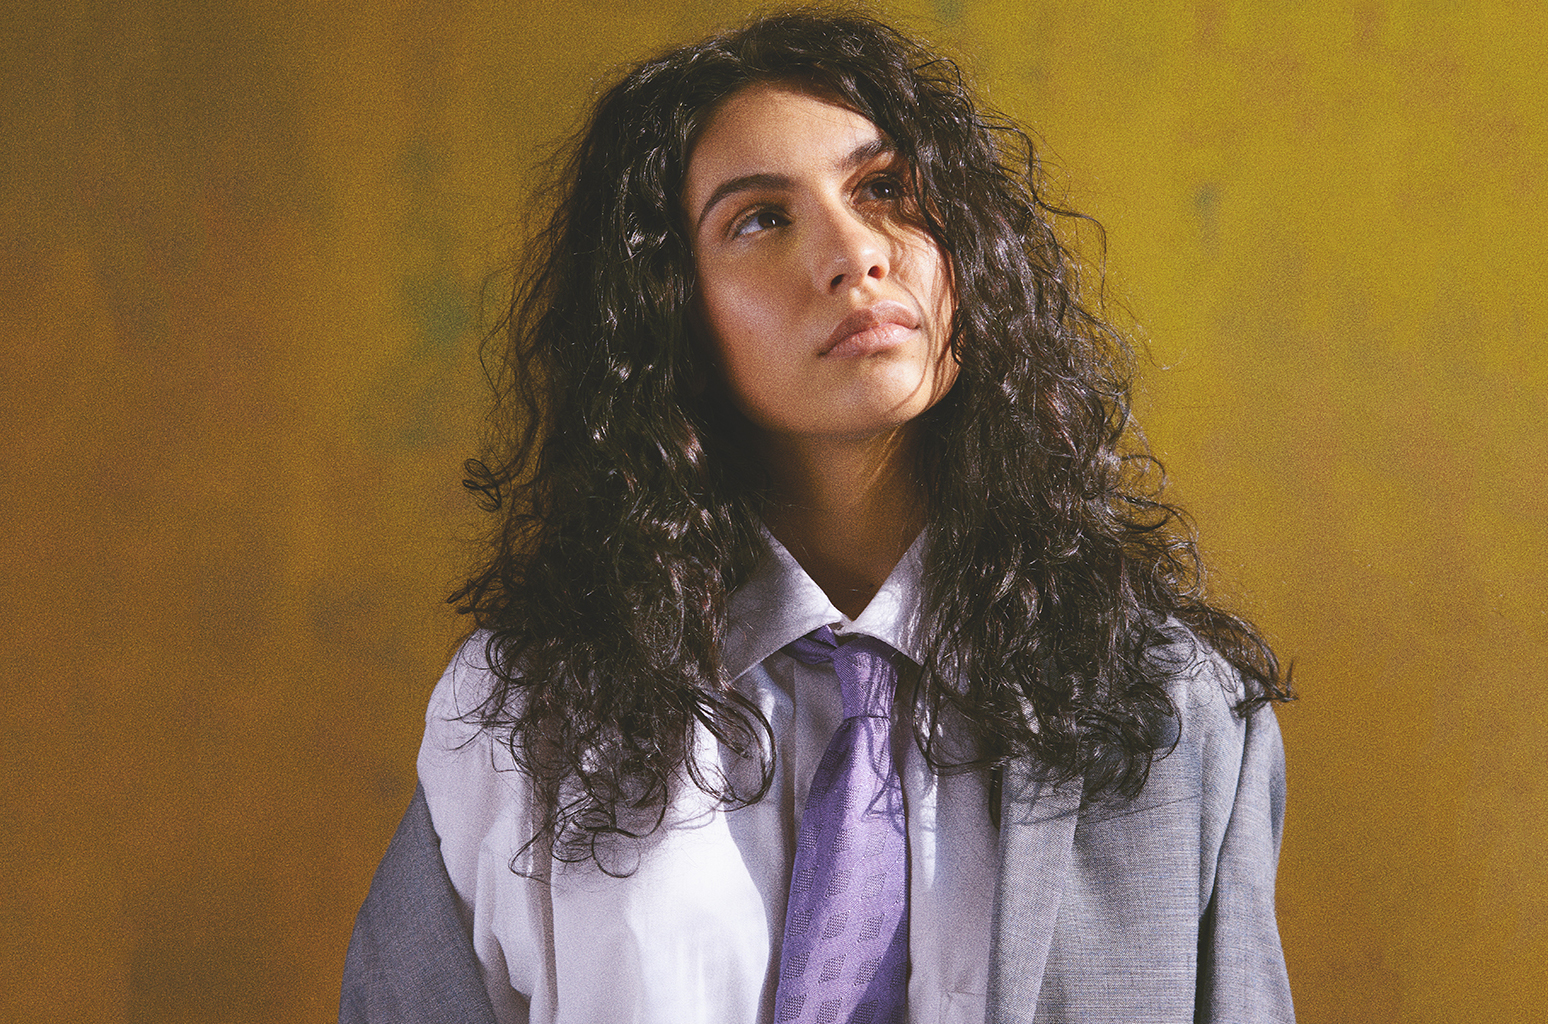 Alessia cara here download mp3 free